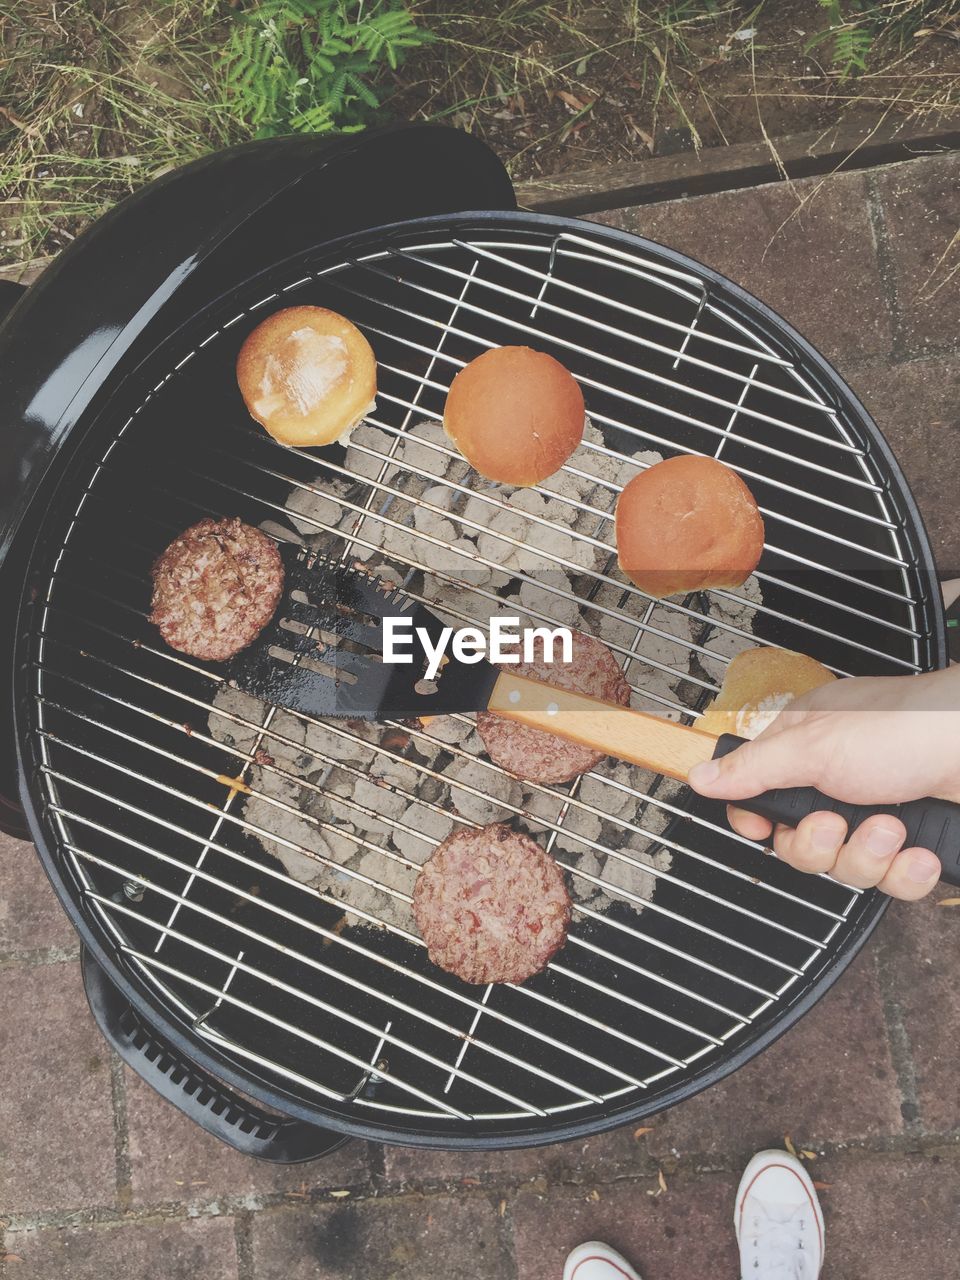 Elevated view of cooking hamburgers on grill